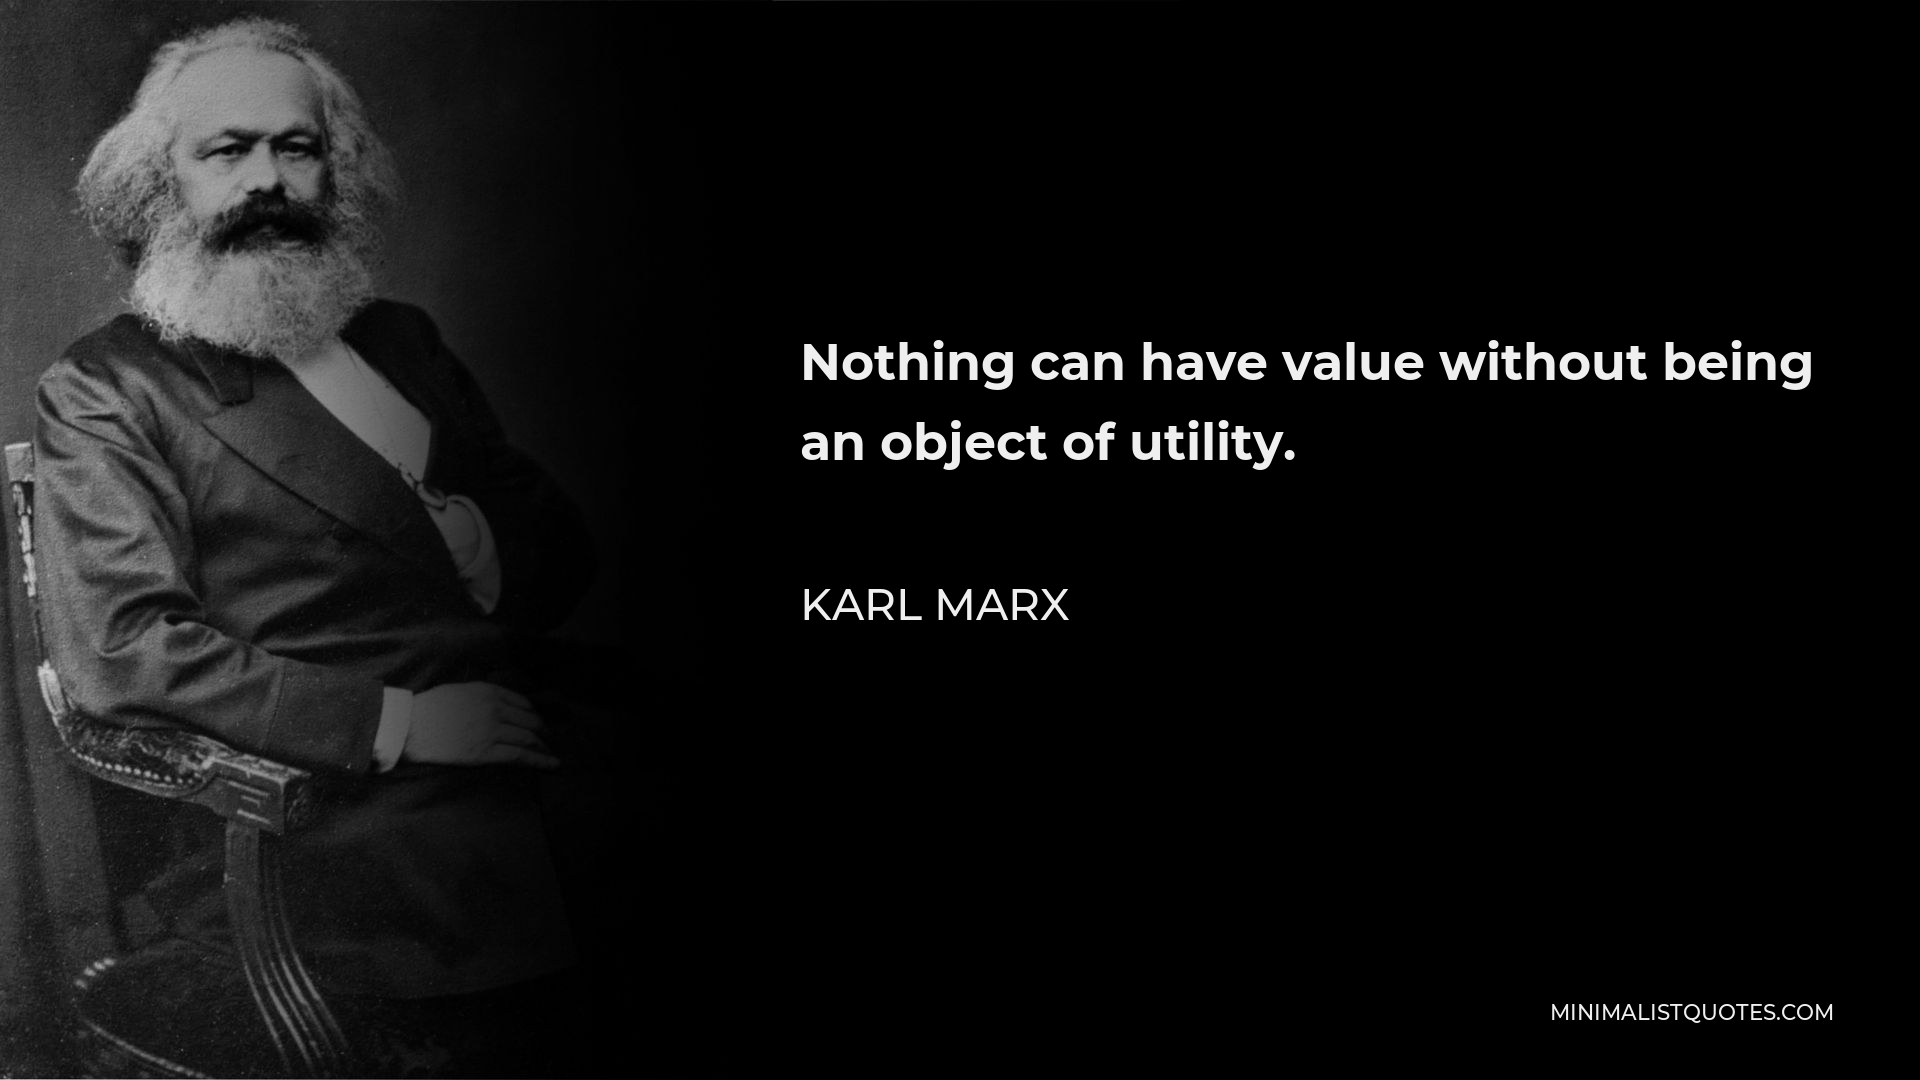 Karl Marx Quote - Nothing can have value without being an object of utility.